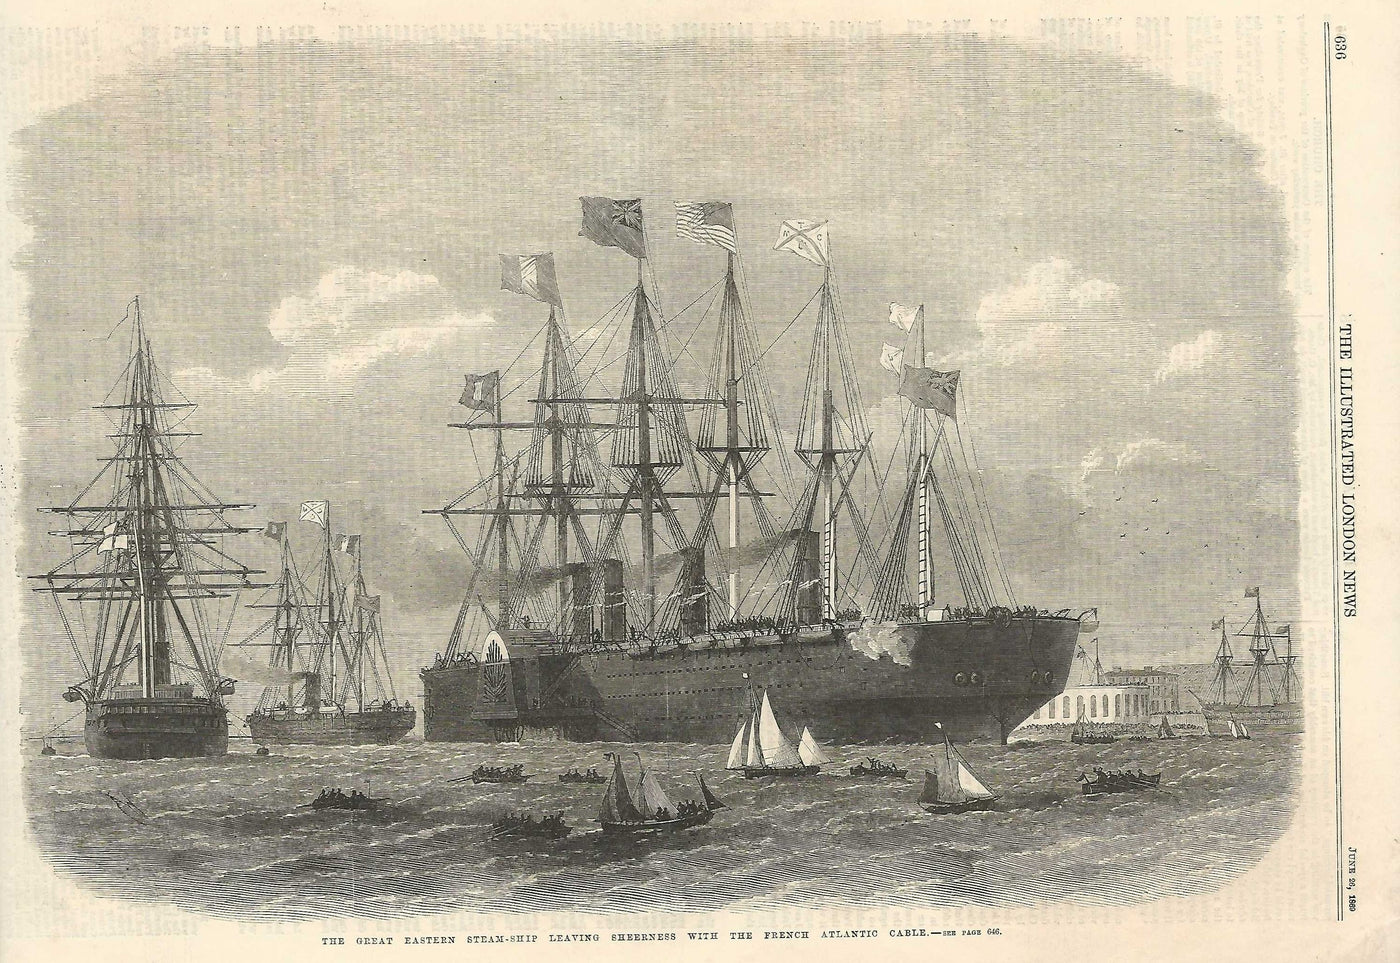 Great Eastern leaves Sheerness with the French Atlantic Cable 1869